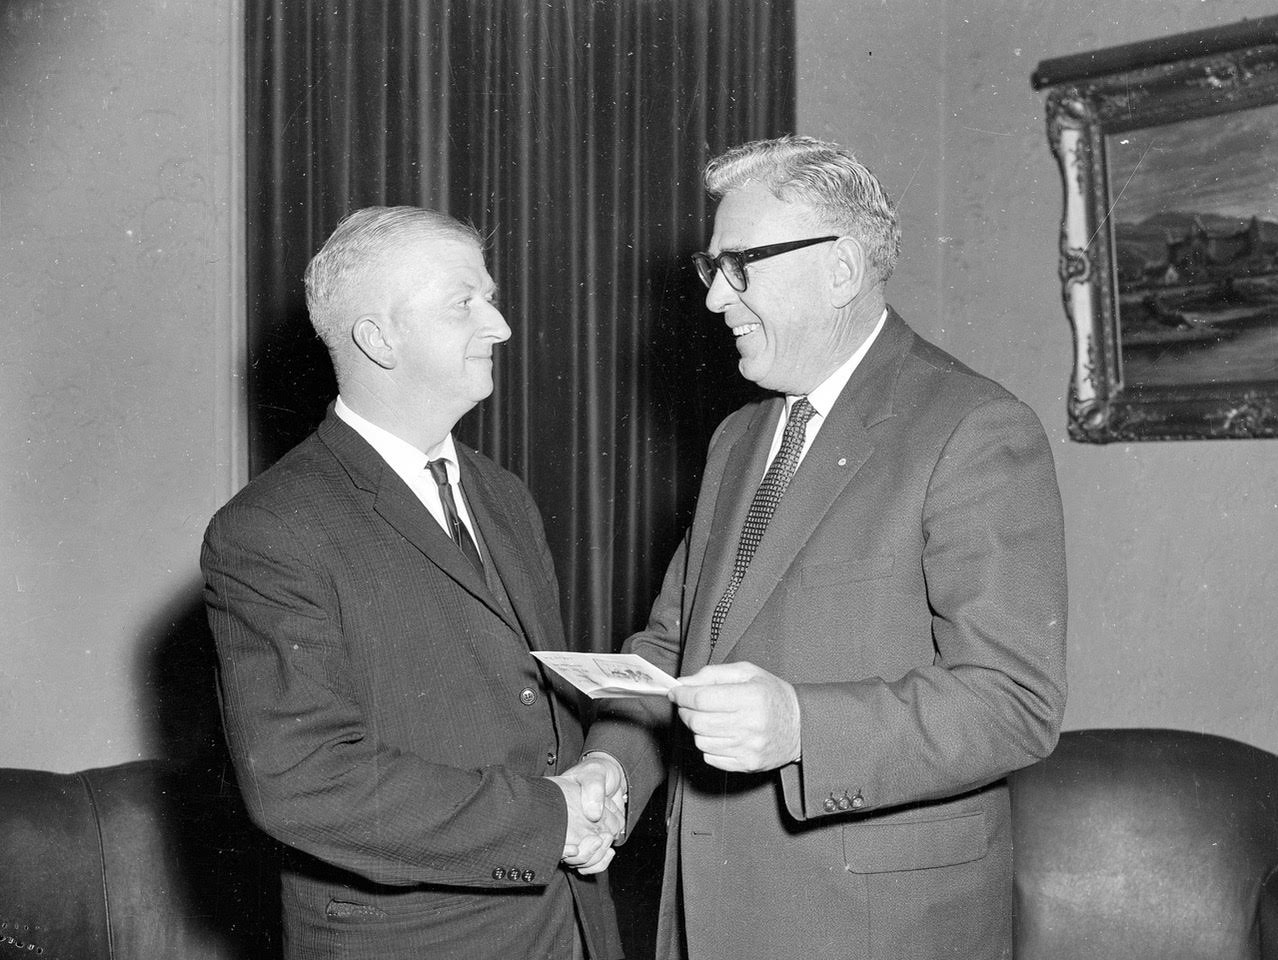 Keith was well known at Hobart's Avalon cinema as a singularly regular film-goer. Here he's receiving his weekly ticket from Mr D.G. Henderson in 1966.